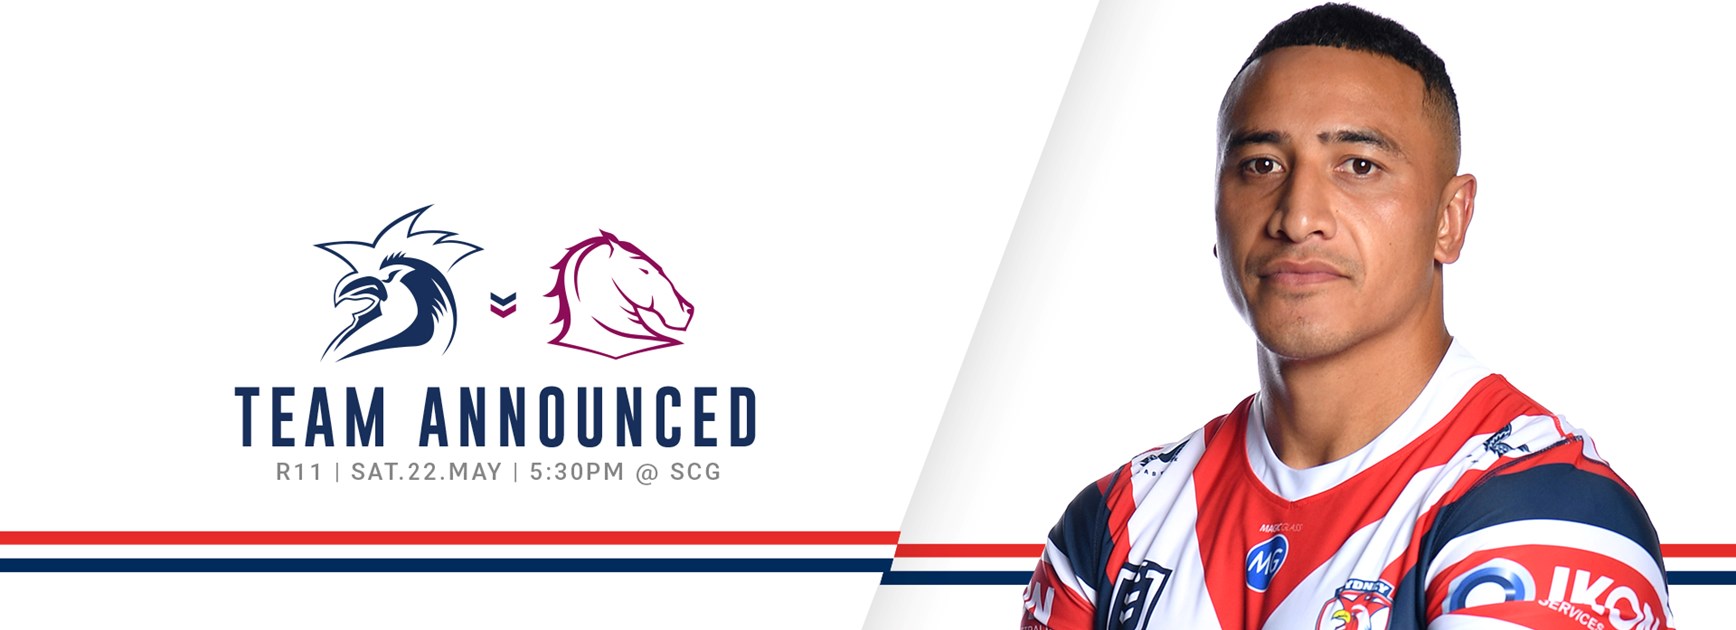 UPDATE: Line Up for Round 11 vs Broncos Announced